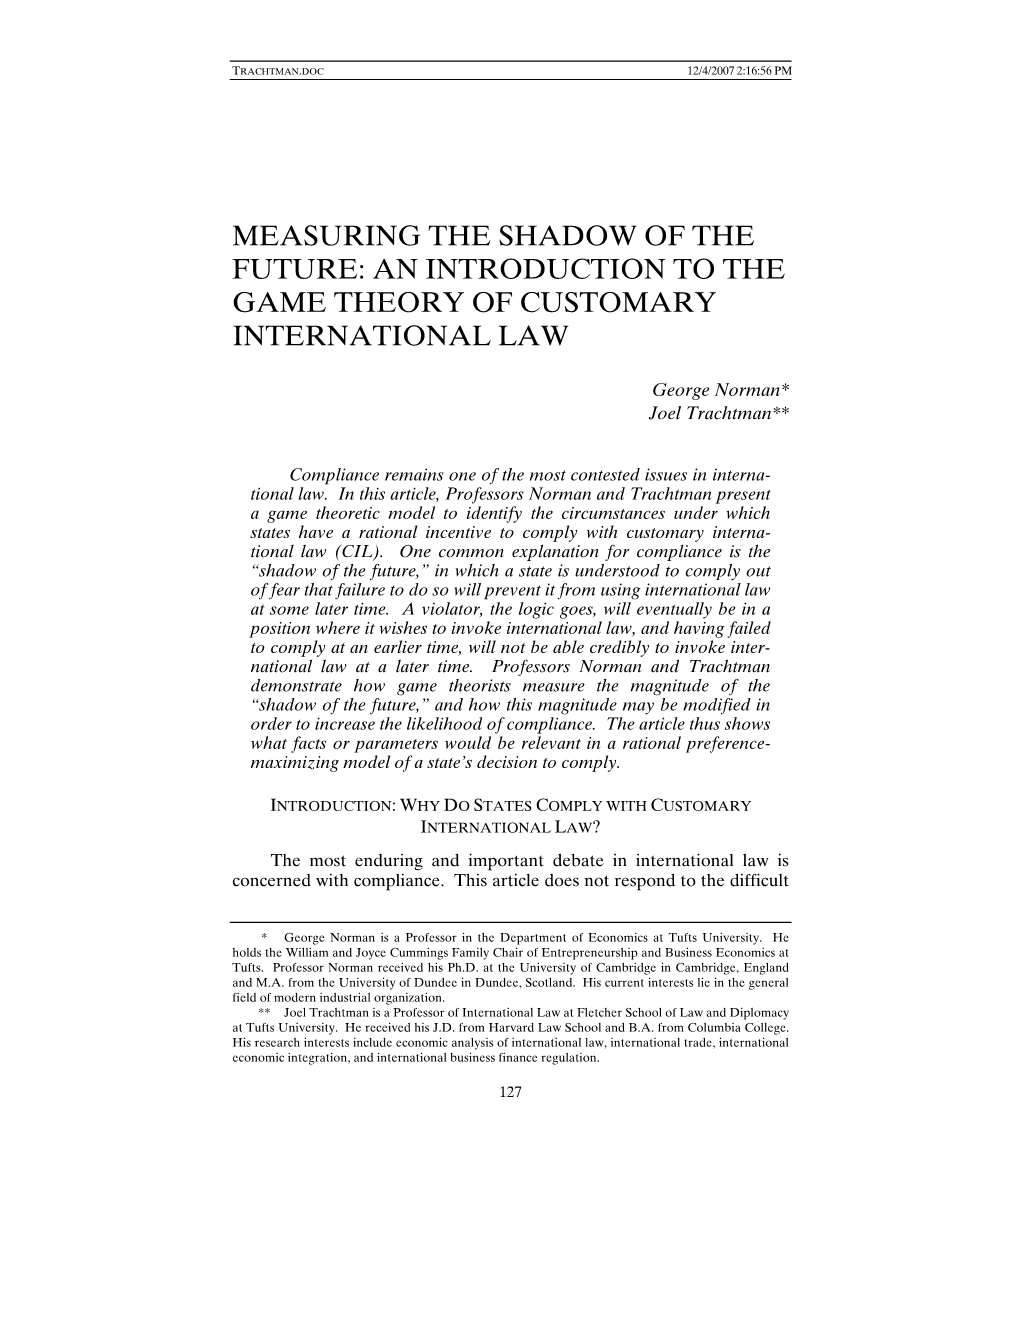 Measuring the Shadow of the Future: an Introduction to the Game Theory of Customary International Law